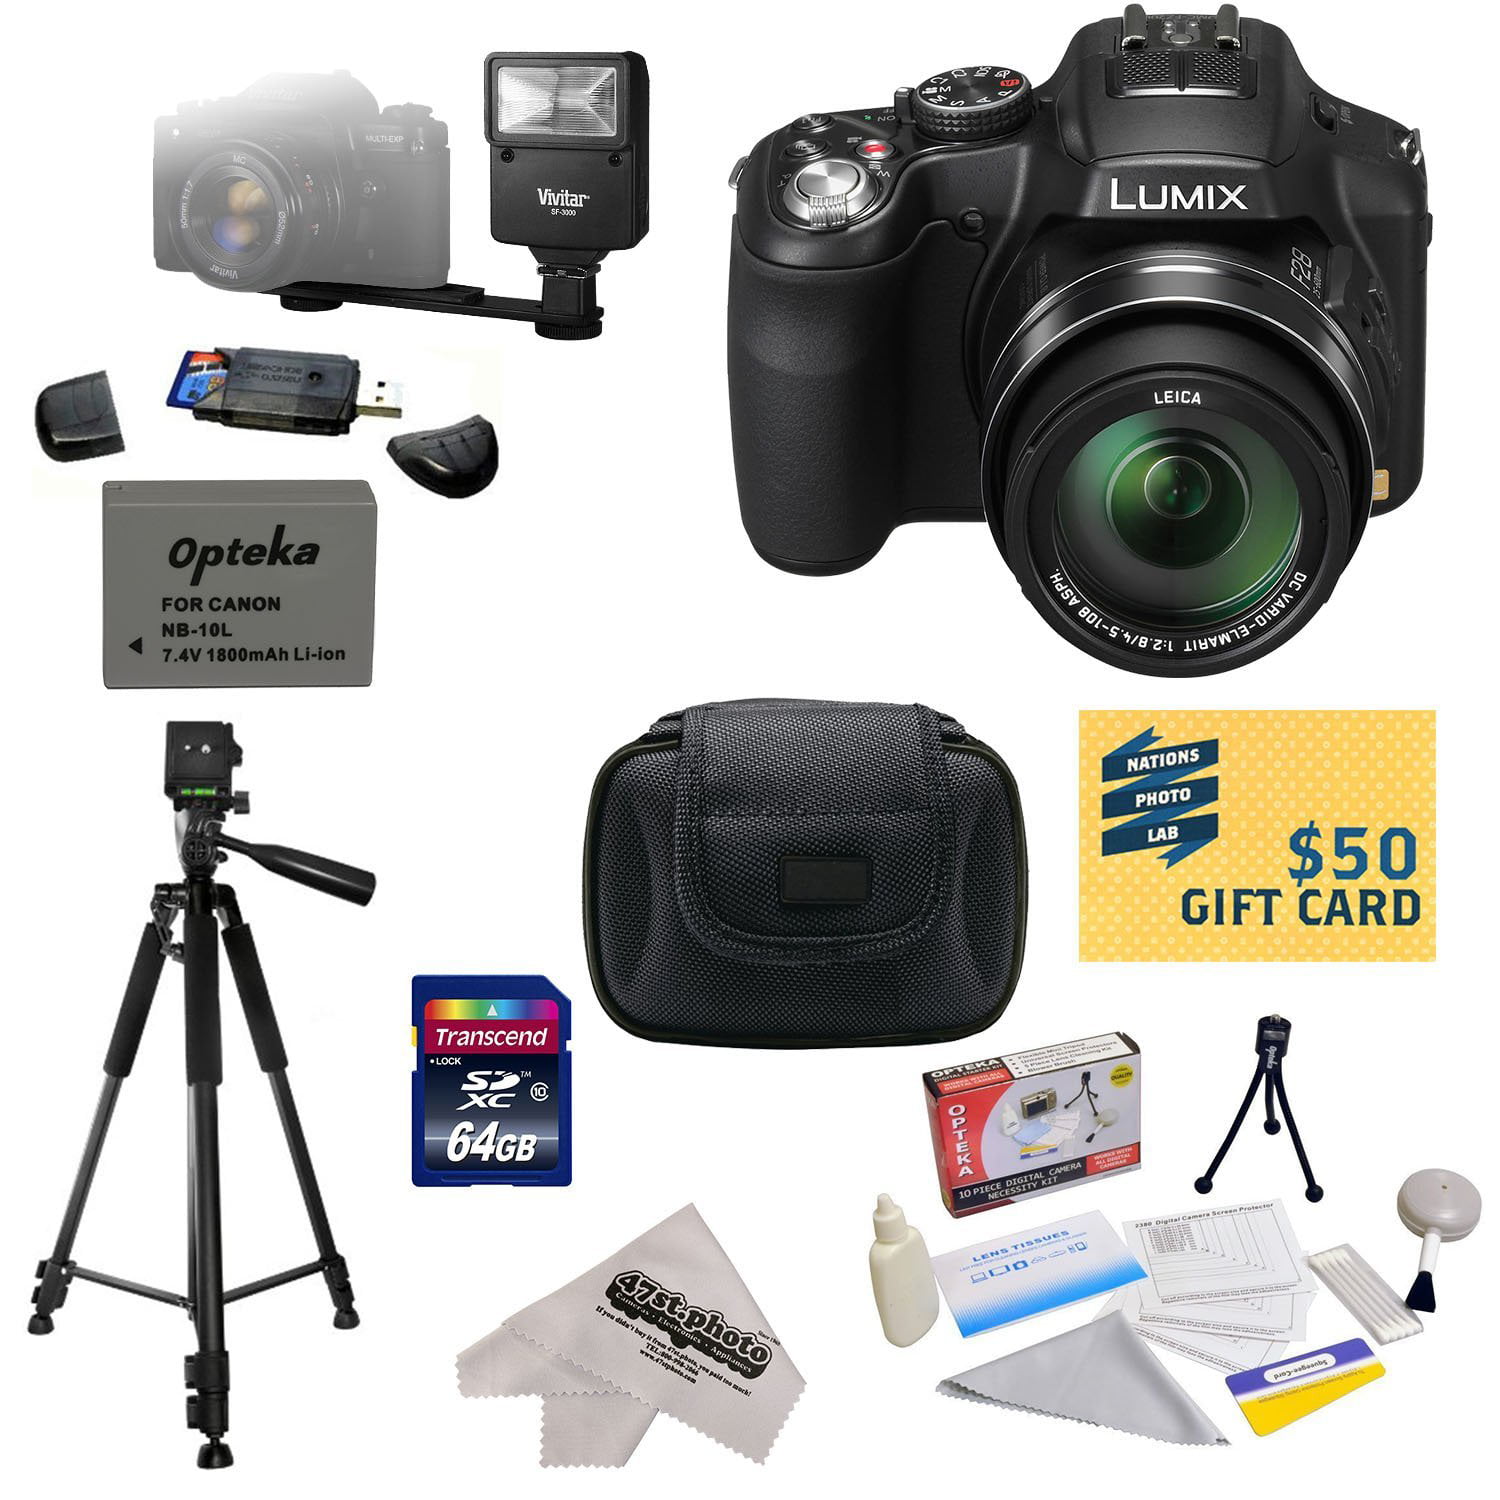 Panasonic DMC-FZ200 Digital Camera with 3-Inch Vari-Angle LCD With 64GB Memory Card, Reader, Battery, Charger, Flash, Carrying Case, Tripod, Cleaning Kit with Screen Protectors, $50 Gift Card - Walmart.com